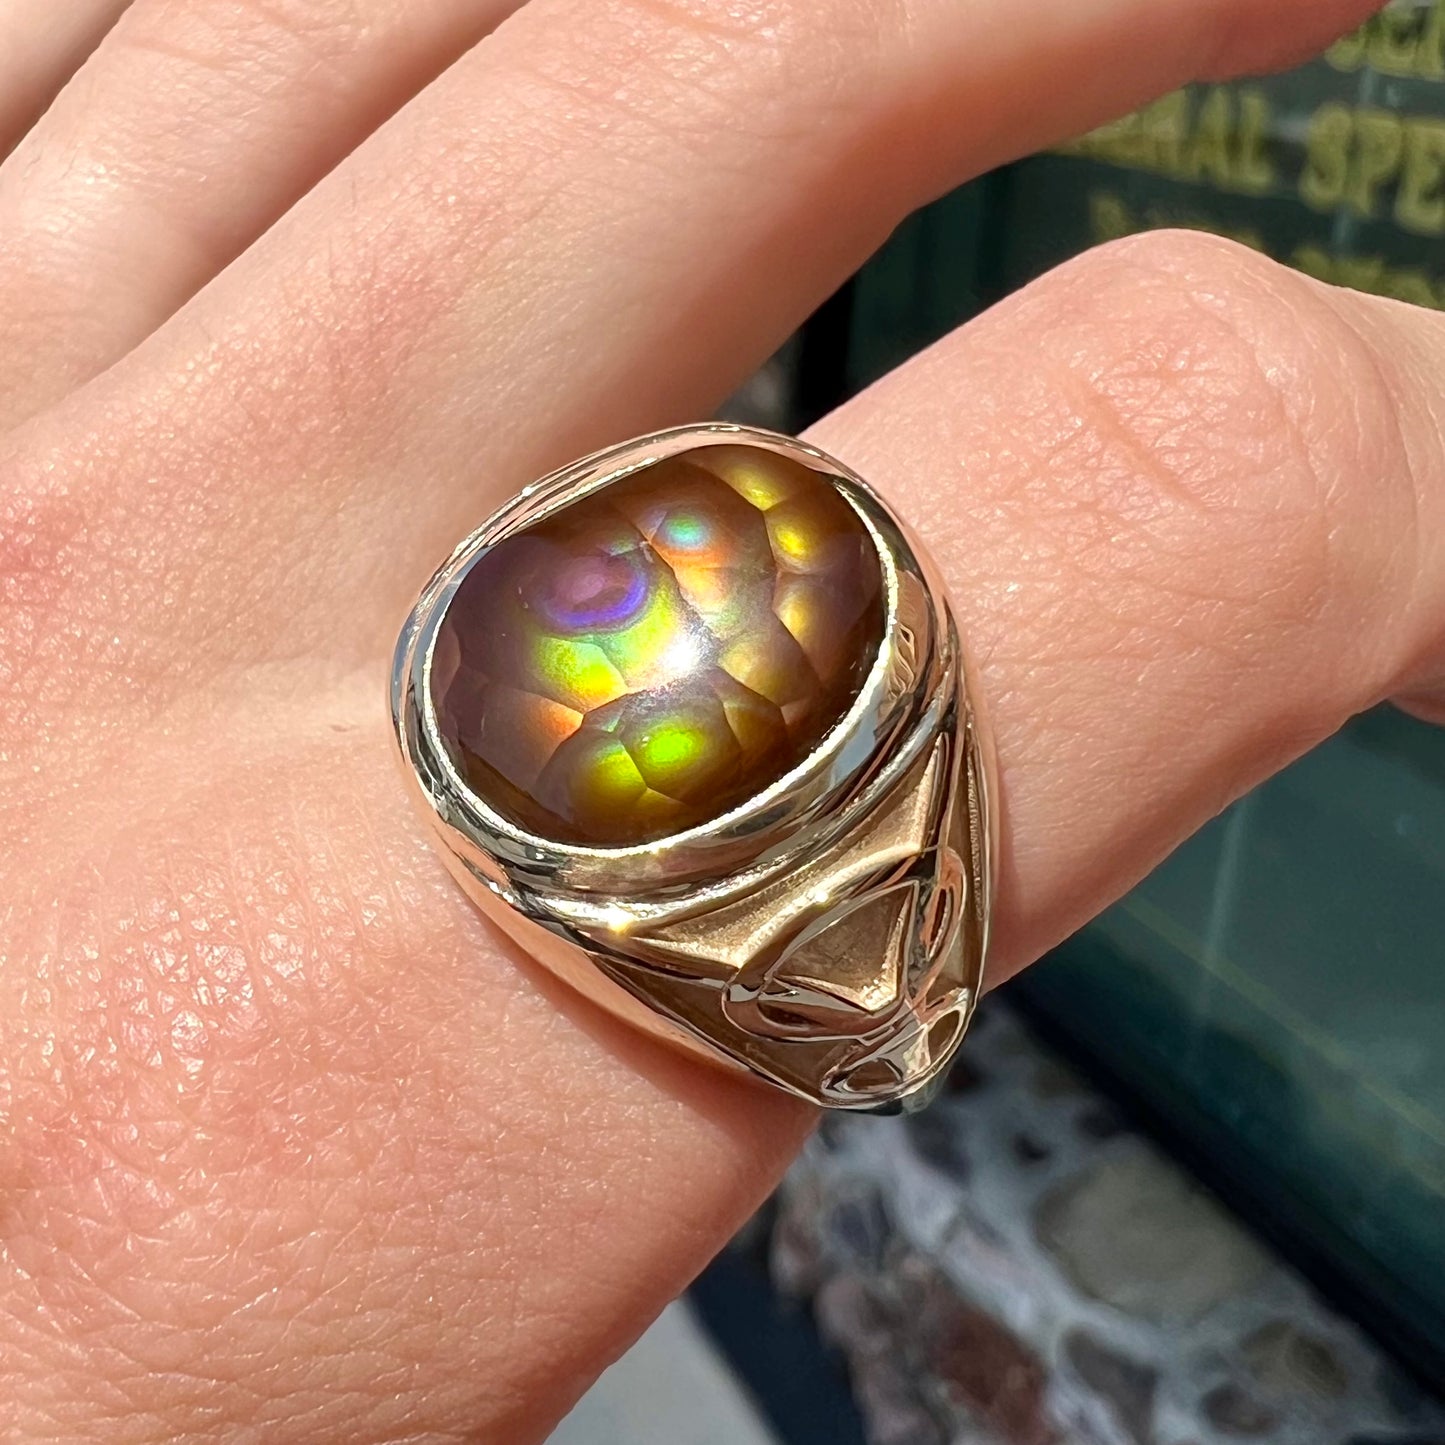 A men's solid yellow gold ring set with a Mexican fire agate stone.  The fire agate has a puple bull's eye pattern.